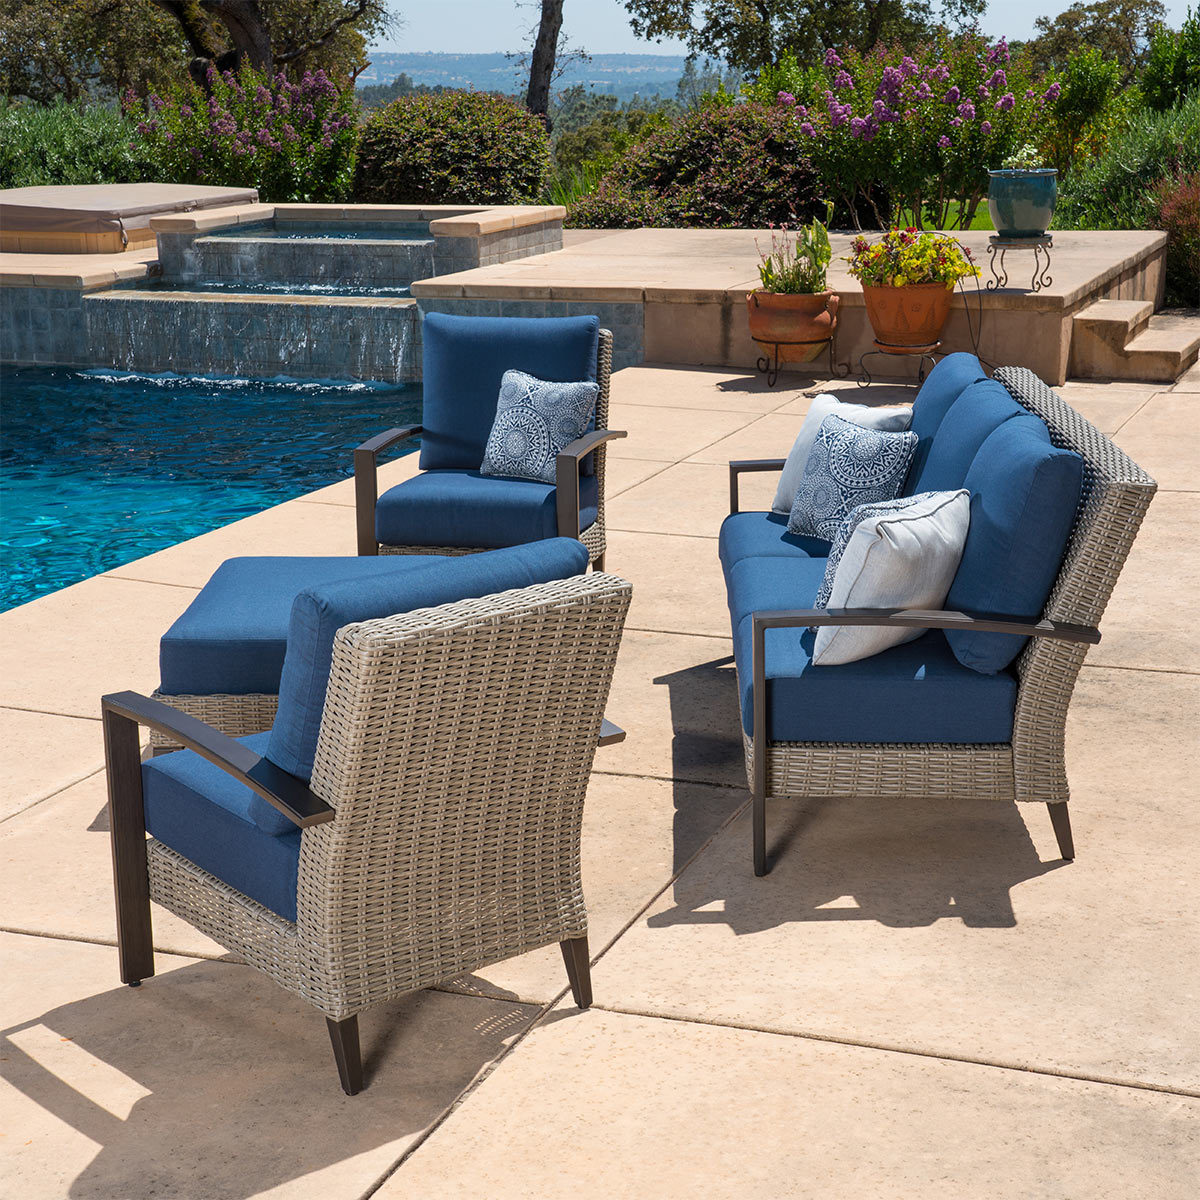 Foremost Delano 4 Piece Woven Deep Seating Set